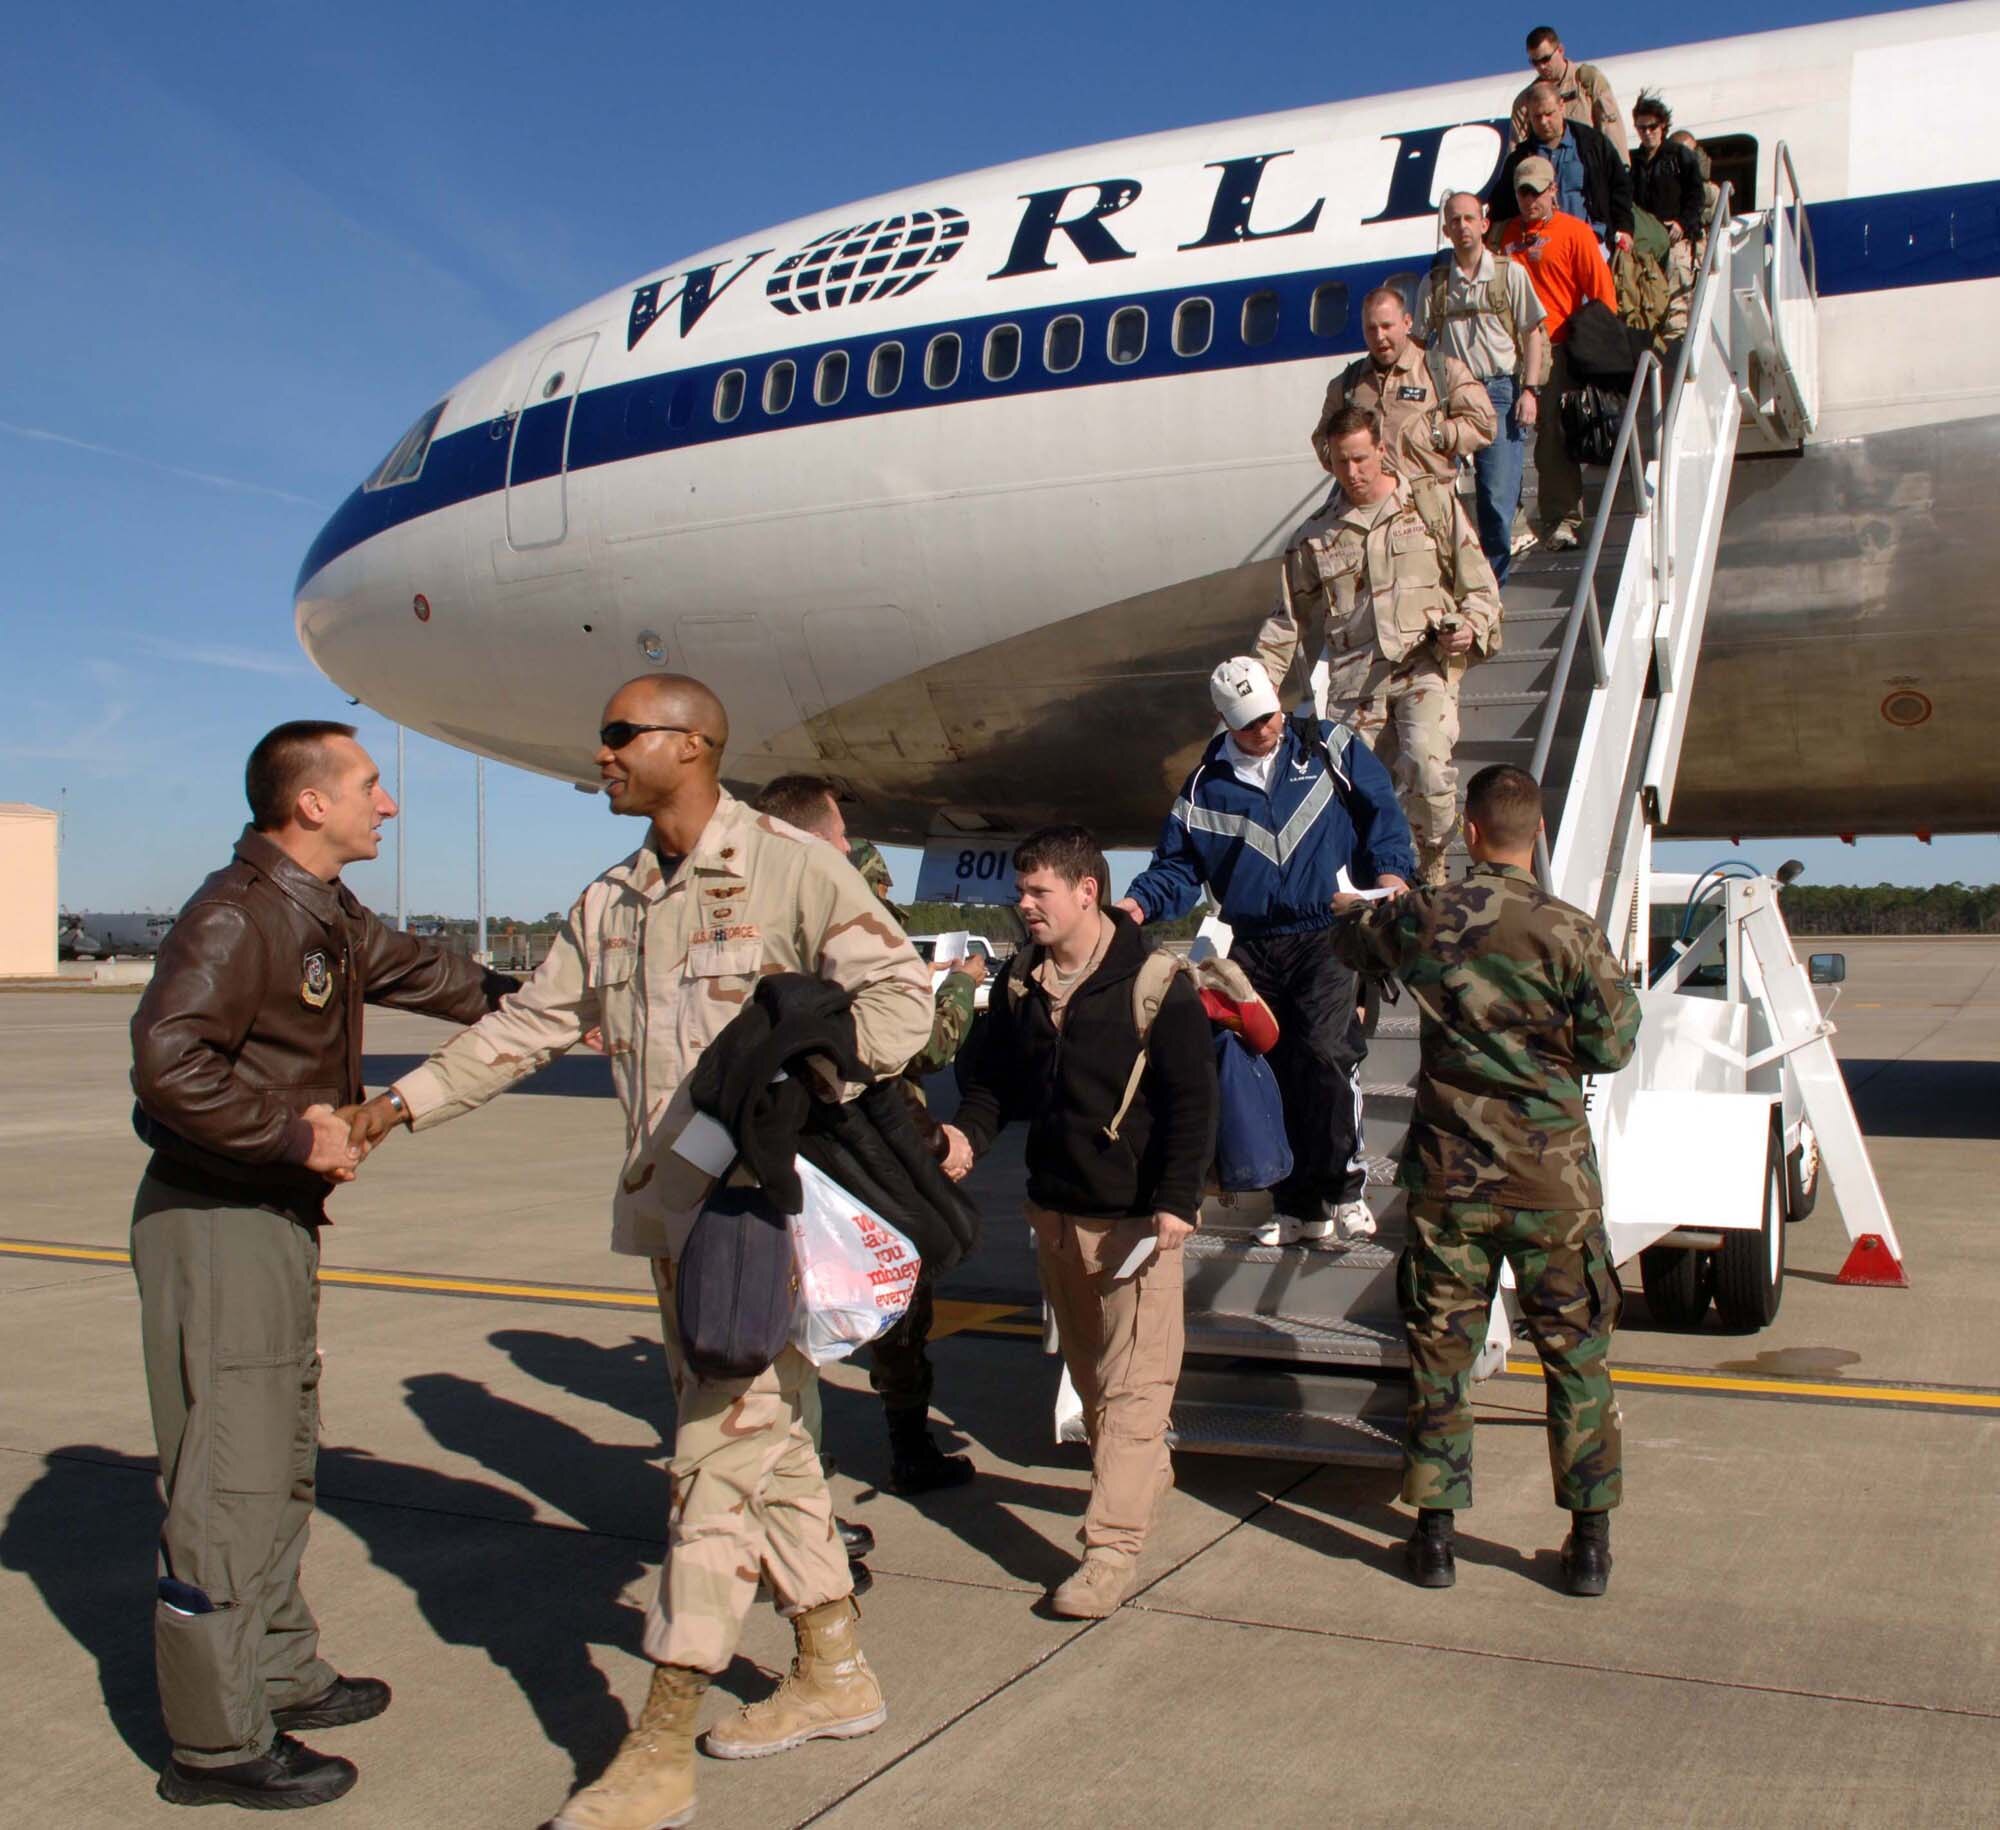 Chief Master Sgt. James Kradel, 1st Special Operations Wing acting command chief, greets the Airmen returning from Southwest Asia as tehy deplane at Commando Hangar Dec. 8 during Operation Homecoming. (U.S. Air Force Photograph by Senior Airman Ali Flisek)